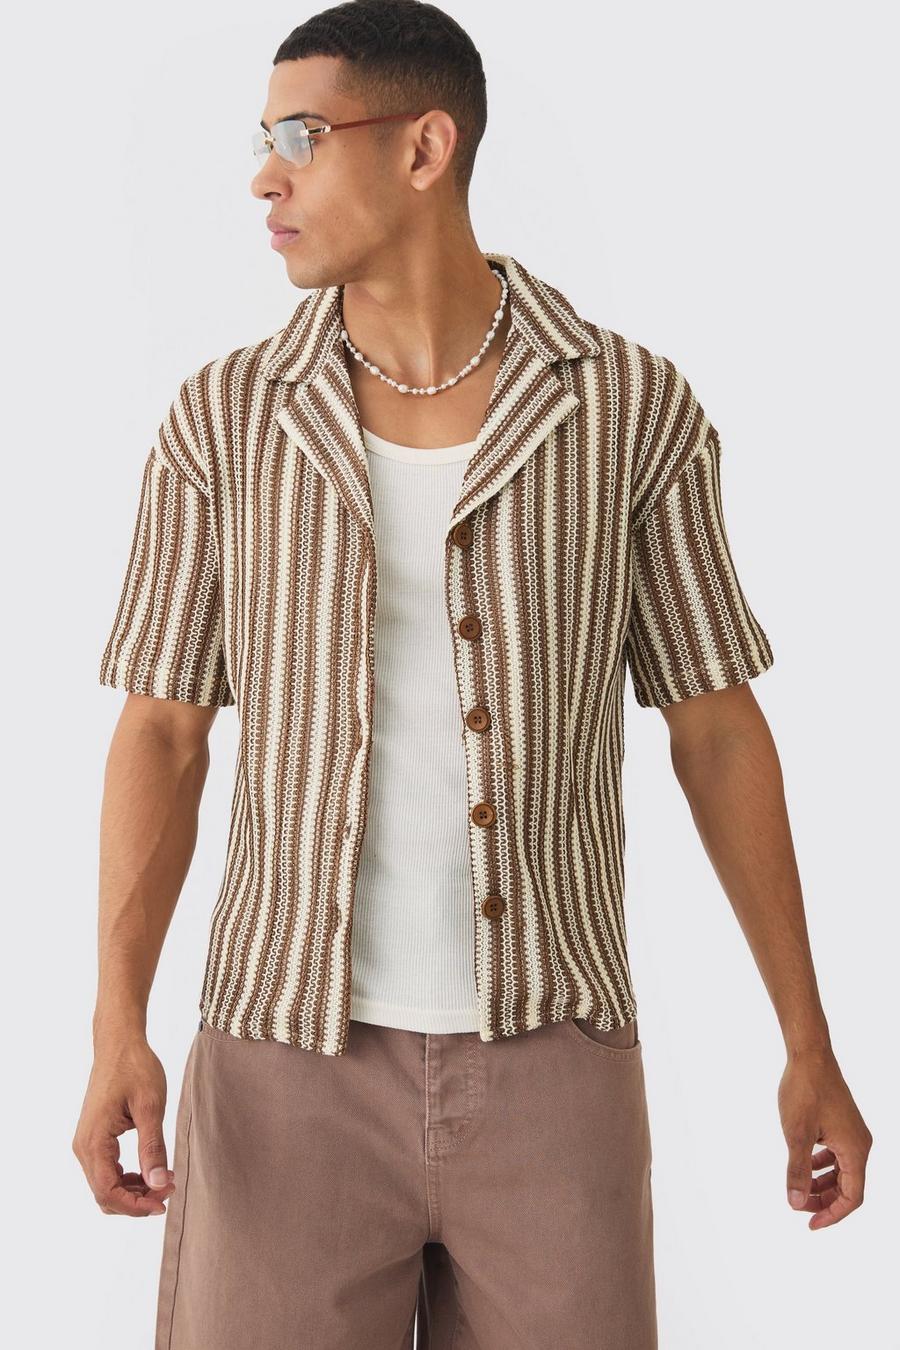 Chocolate Boxy Fit Revere Open Weave Stripe Shirt 